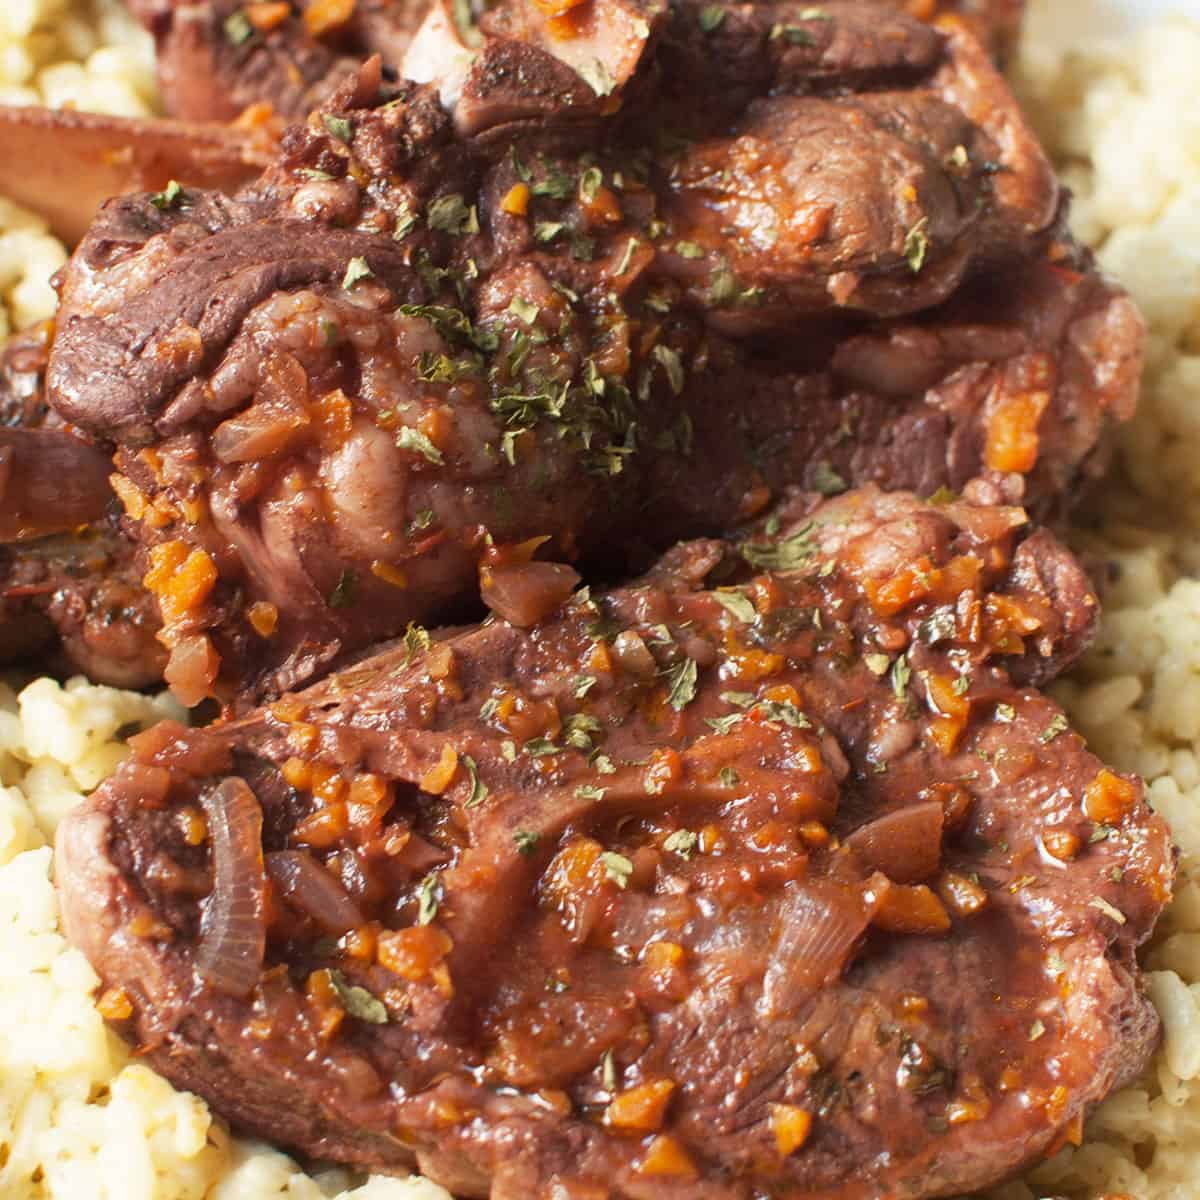 Pieces of braised lamb and onions on a bed of couscous.